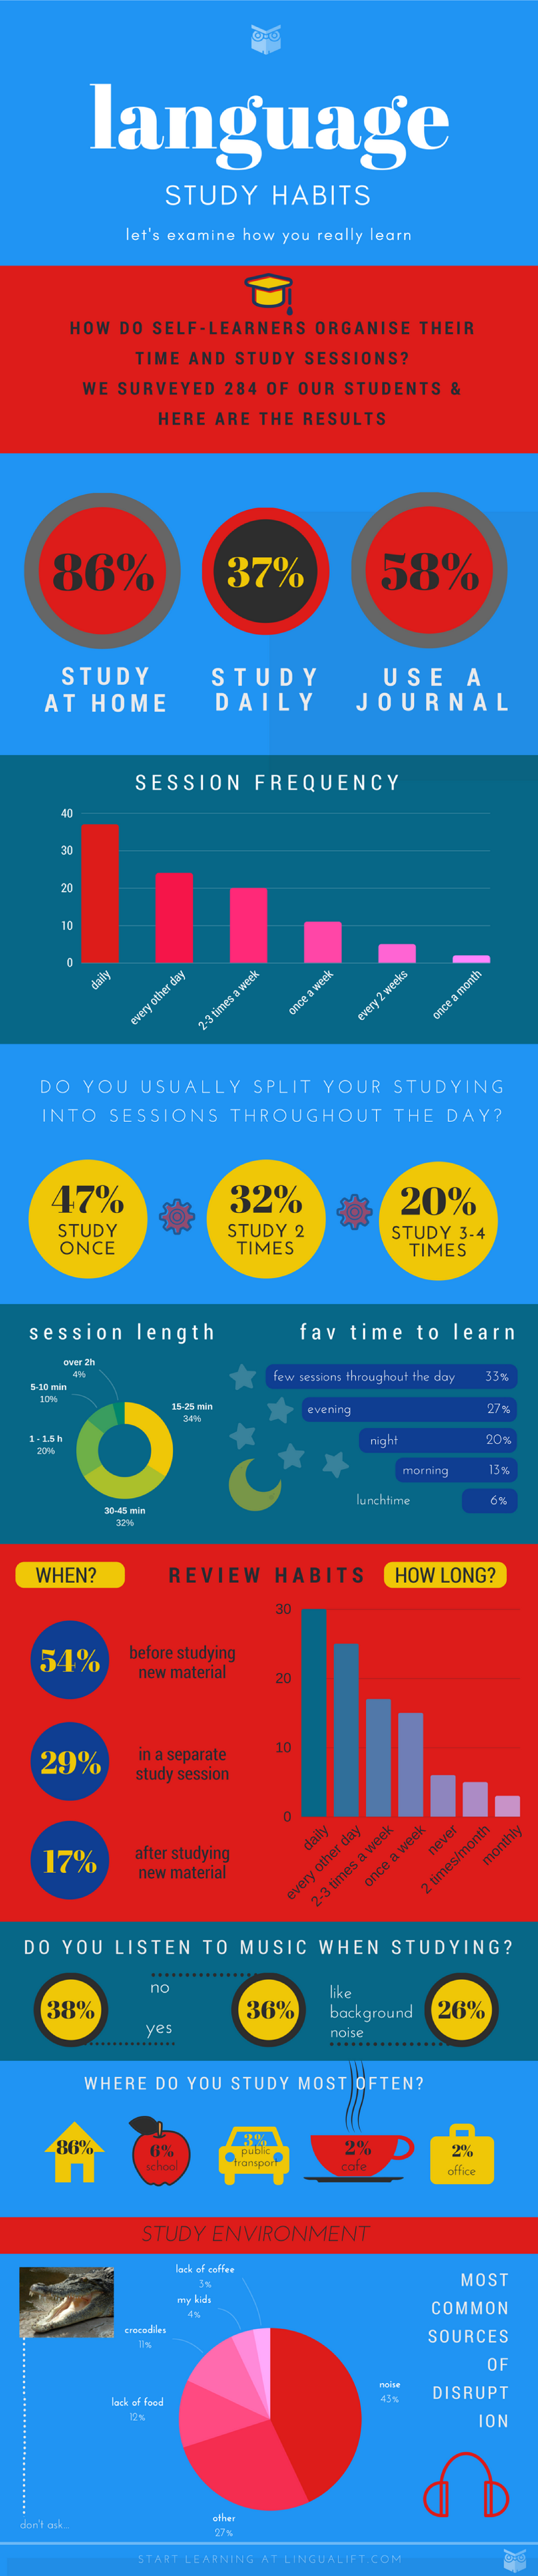 How Do People Learn Languages? Language Study Habits #infographic